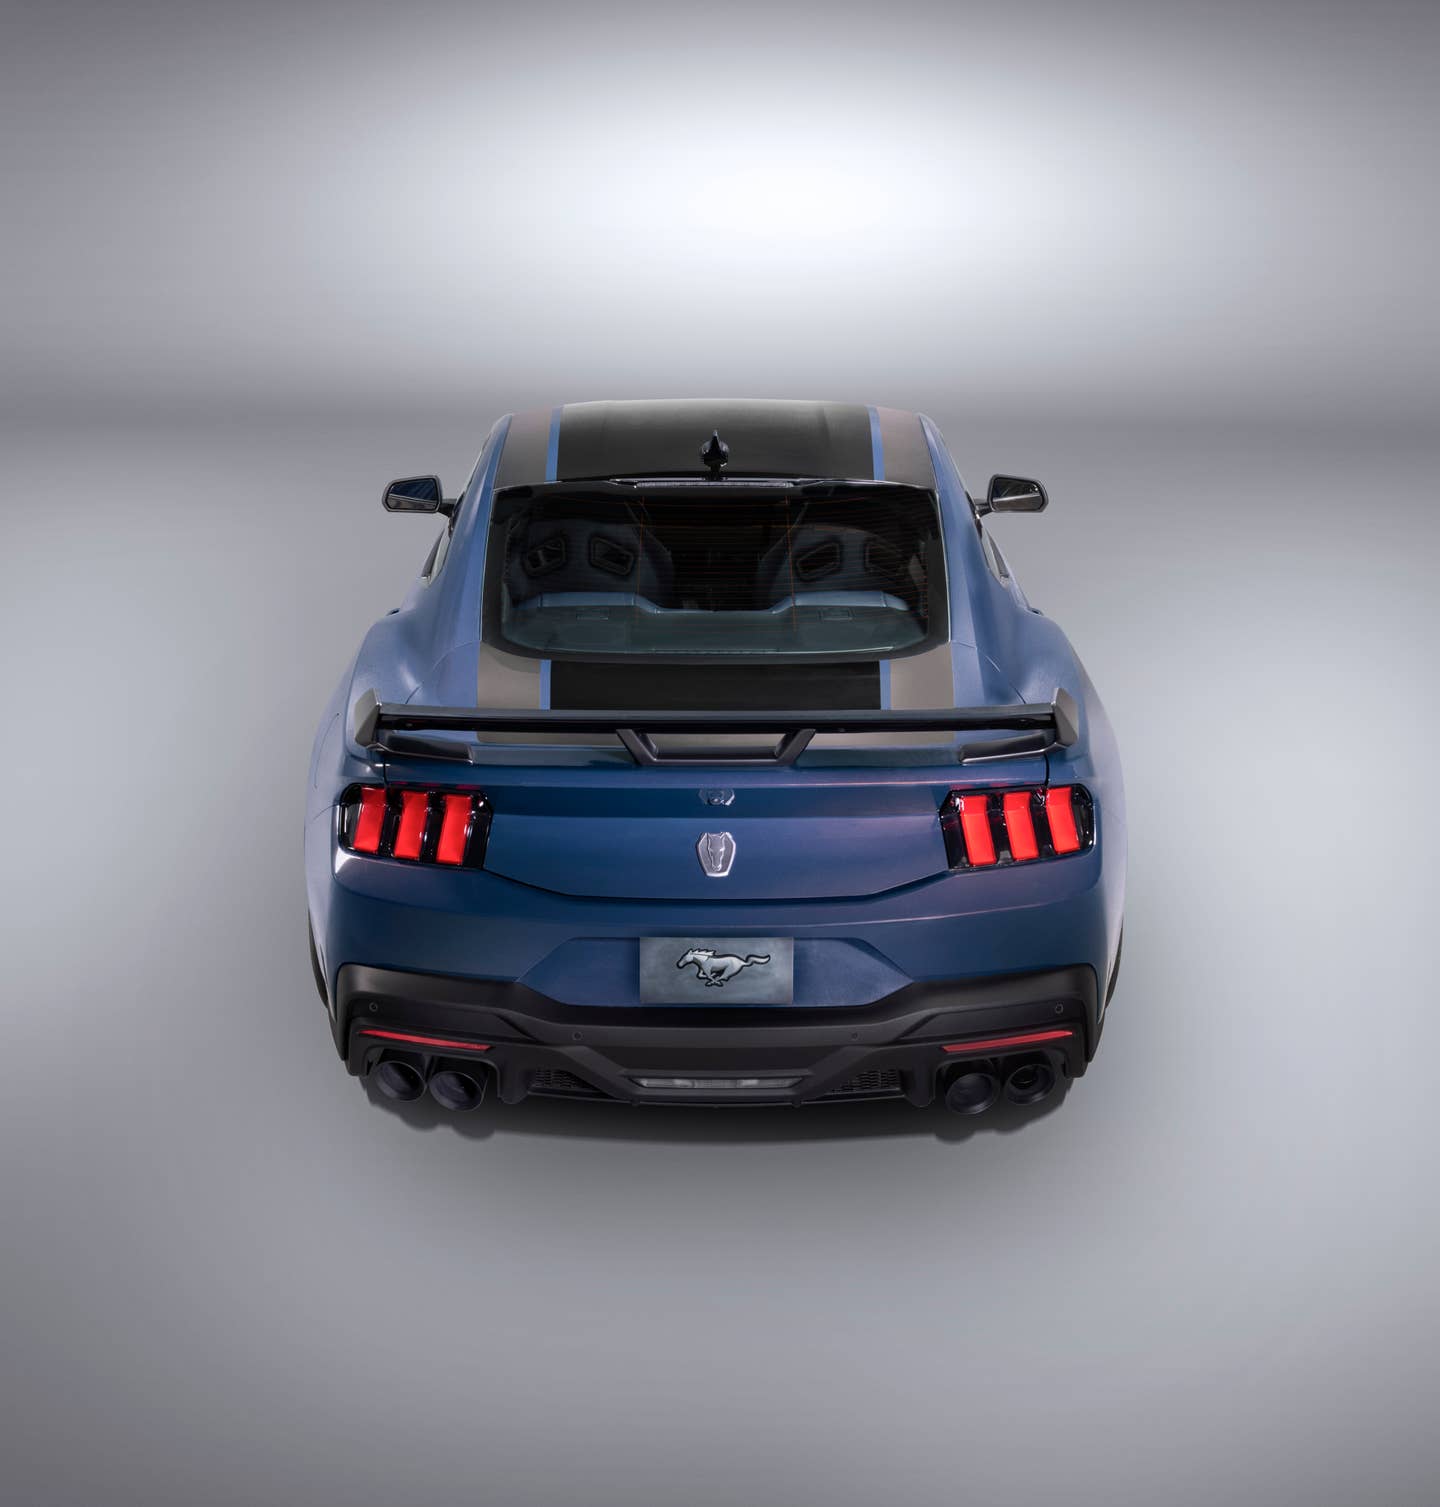 Underscoring the shadowy, muscular physique of the Mustang Dark Horse, available hand-painted graphics create a cohesive visual language throughout the vehicle and artfully accentuate its performance.